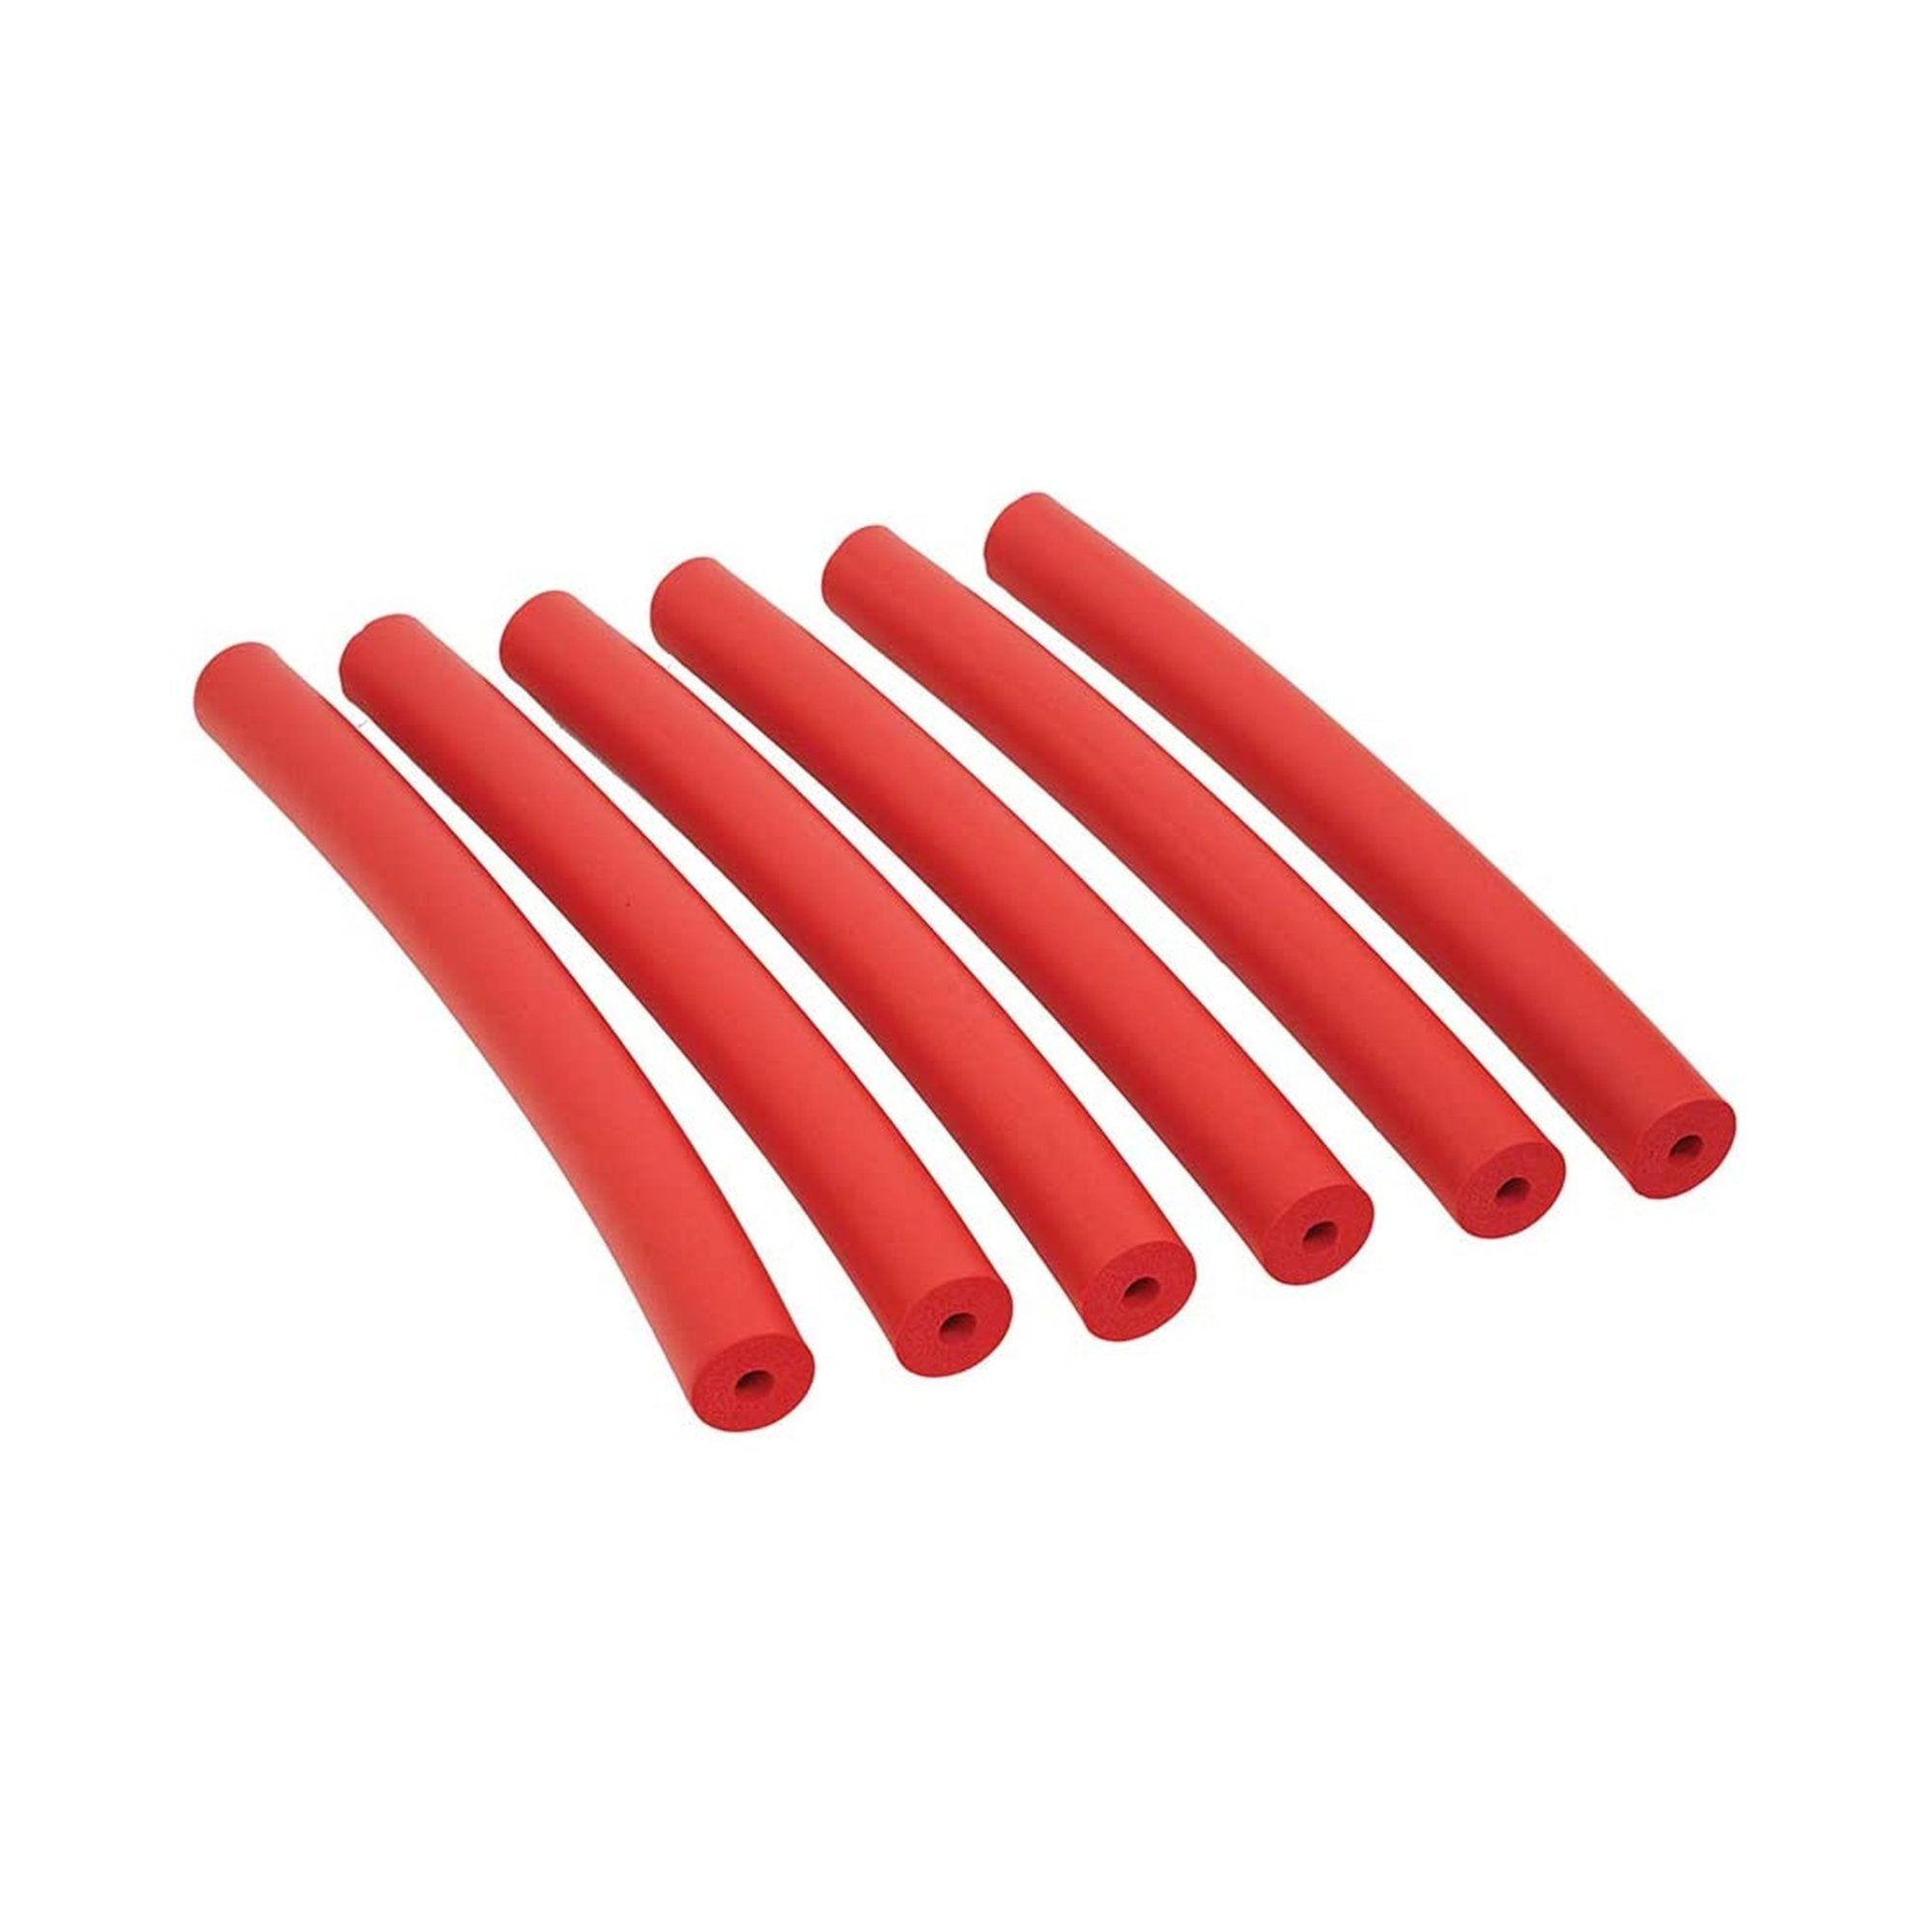 Closed Cell Foam Tubing 3/8 X 1-1/8 Inch, 3/8 Inch, Red